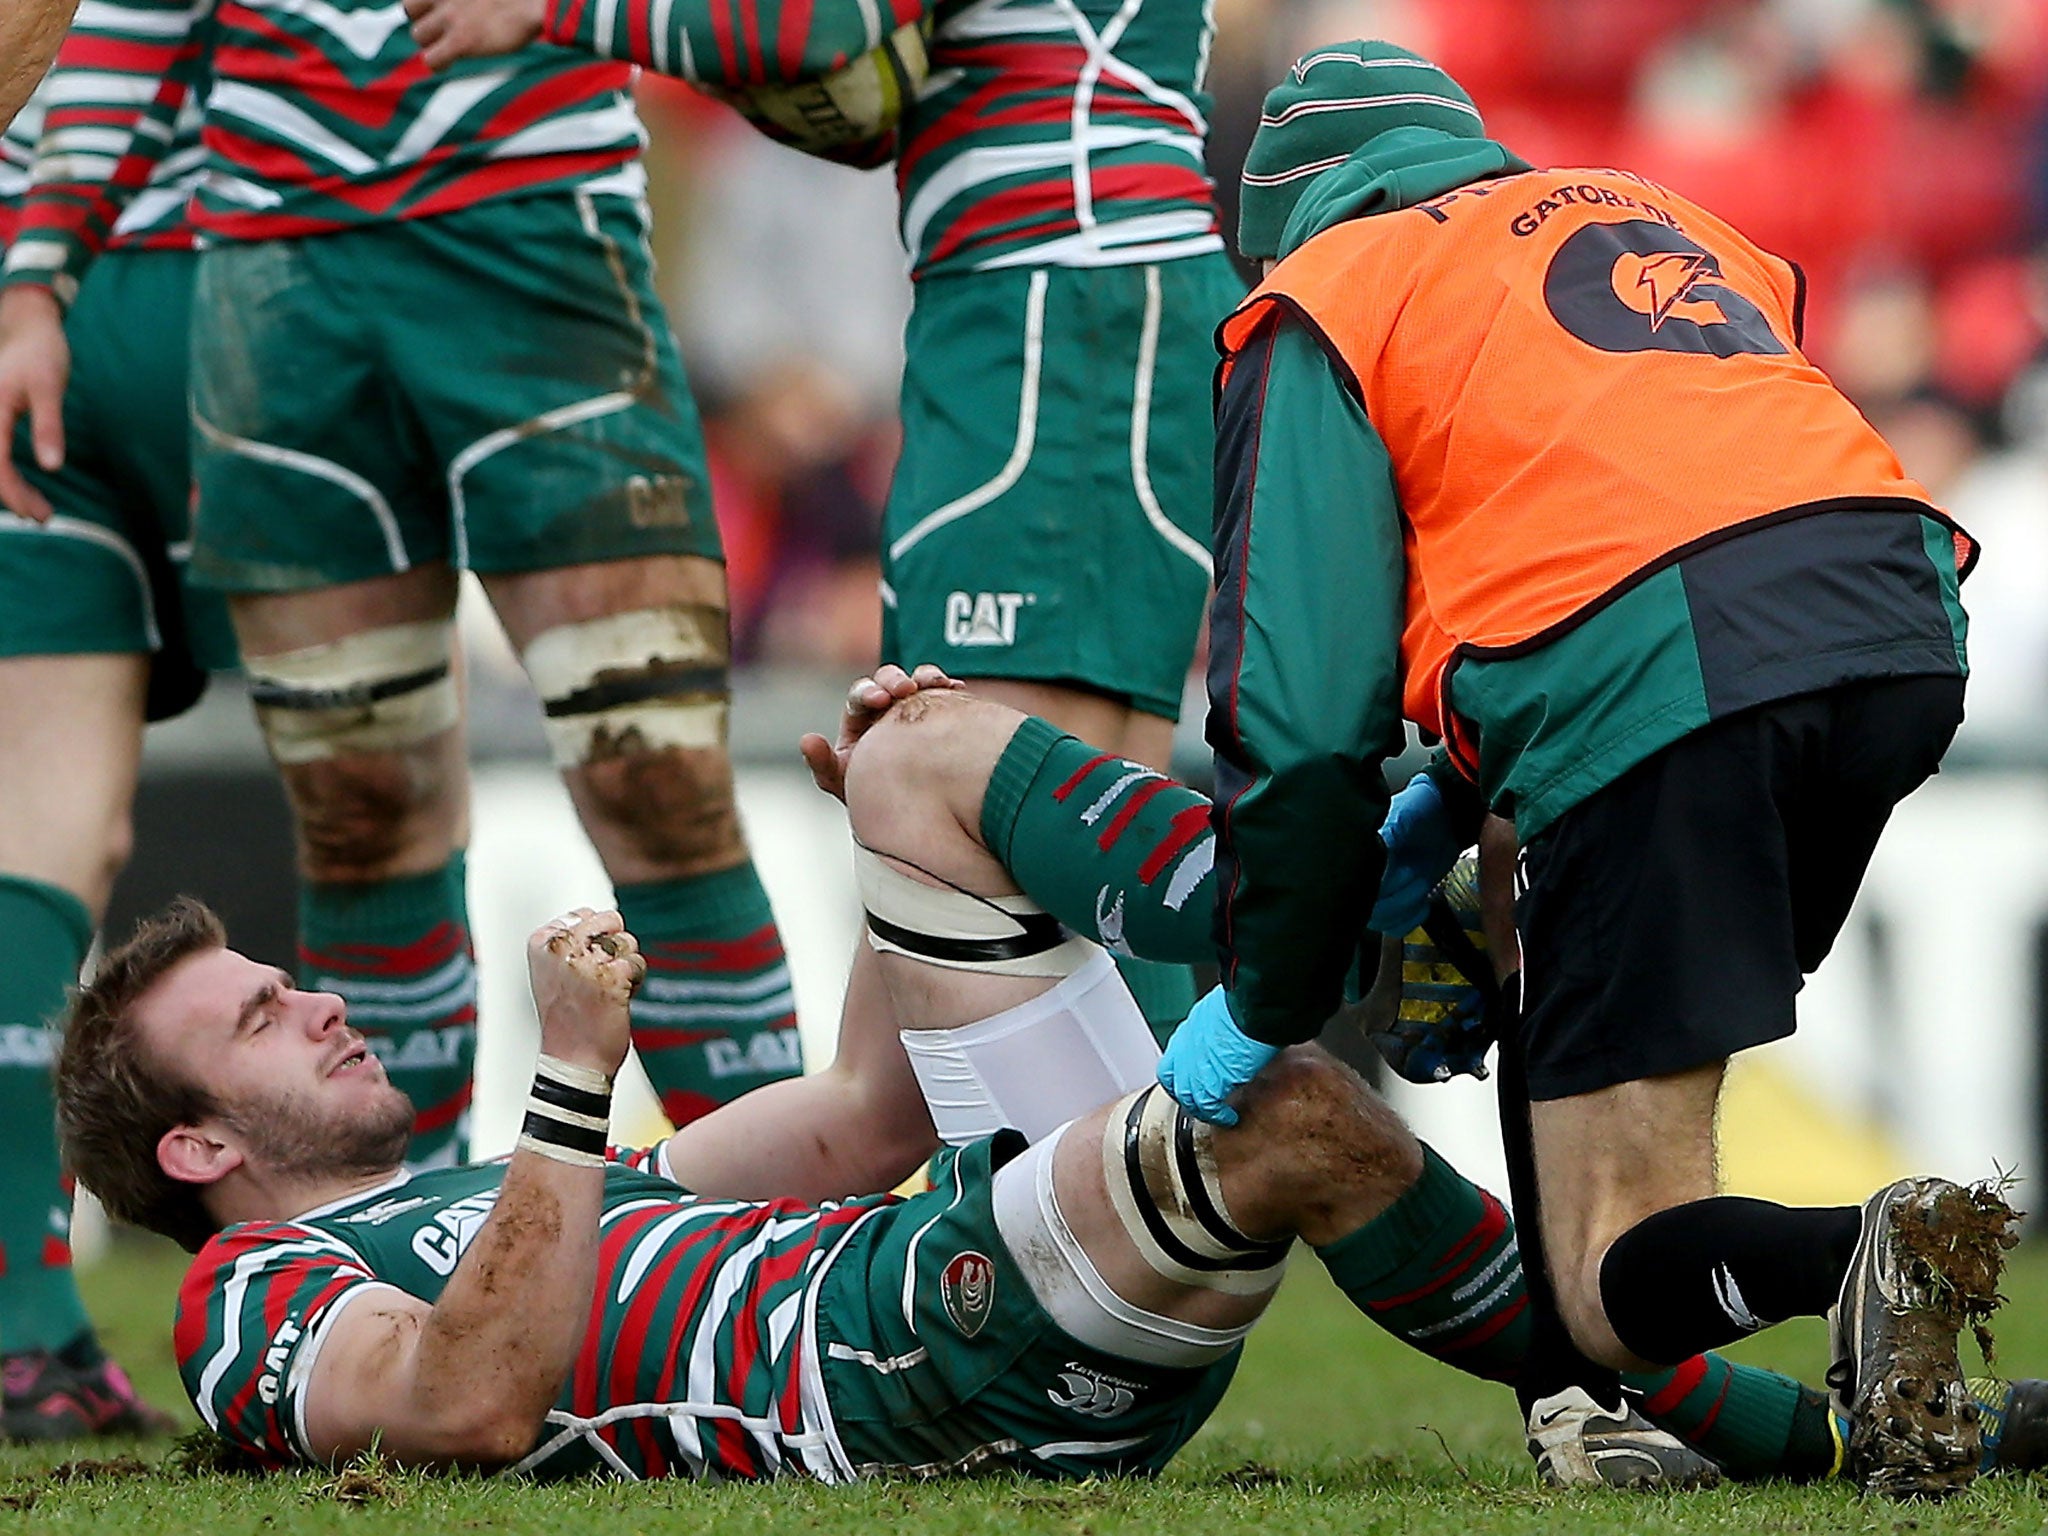 Tigers' director of rugby Richard Cockerill said of Tom Croft's injury: 'Tom's okay. He stiffened up and had a spasm and he just couldn’t continue.'